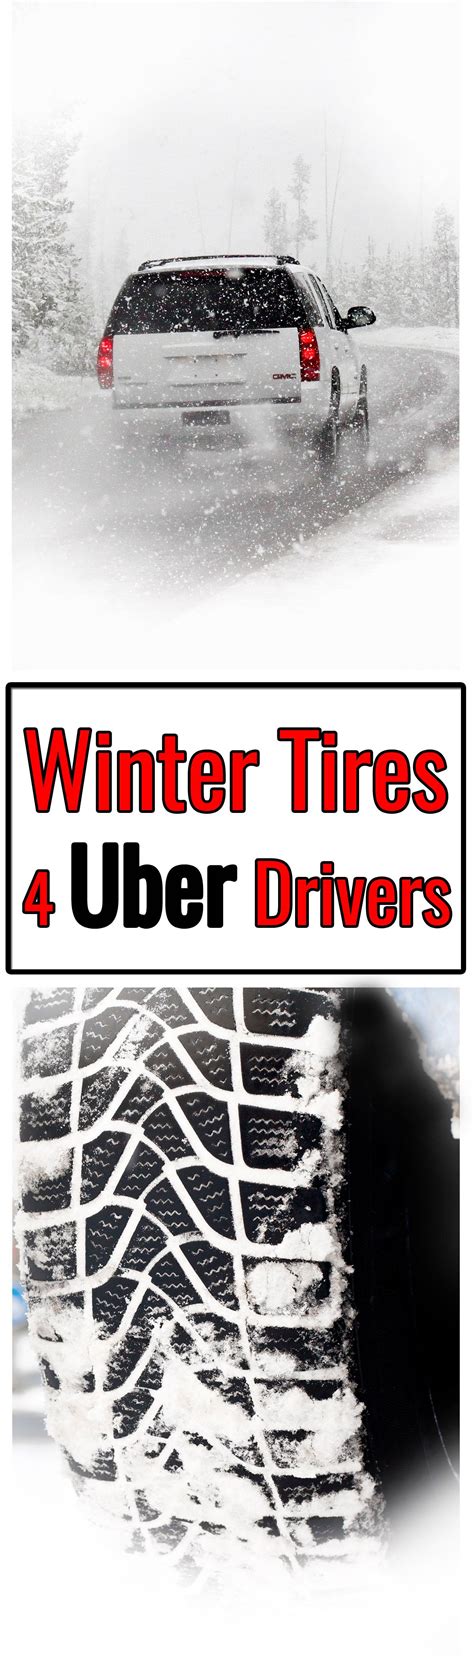 The Best Snow Tires For Uber Drivers Have Strong Grip On Snow And Ice